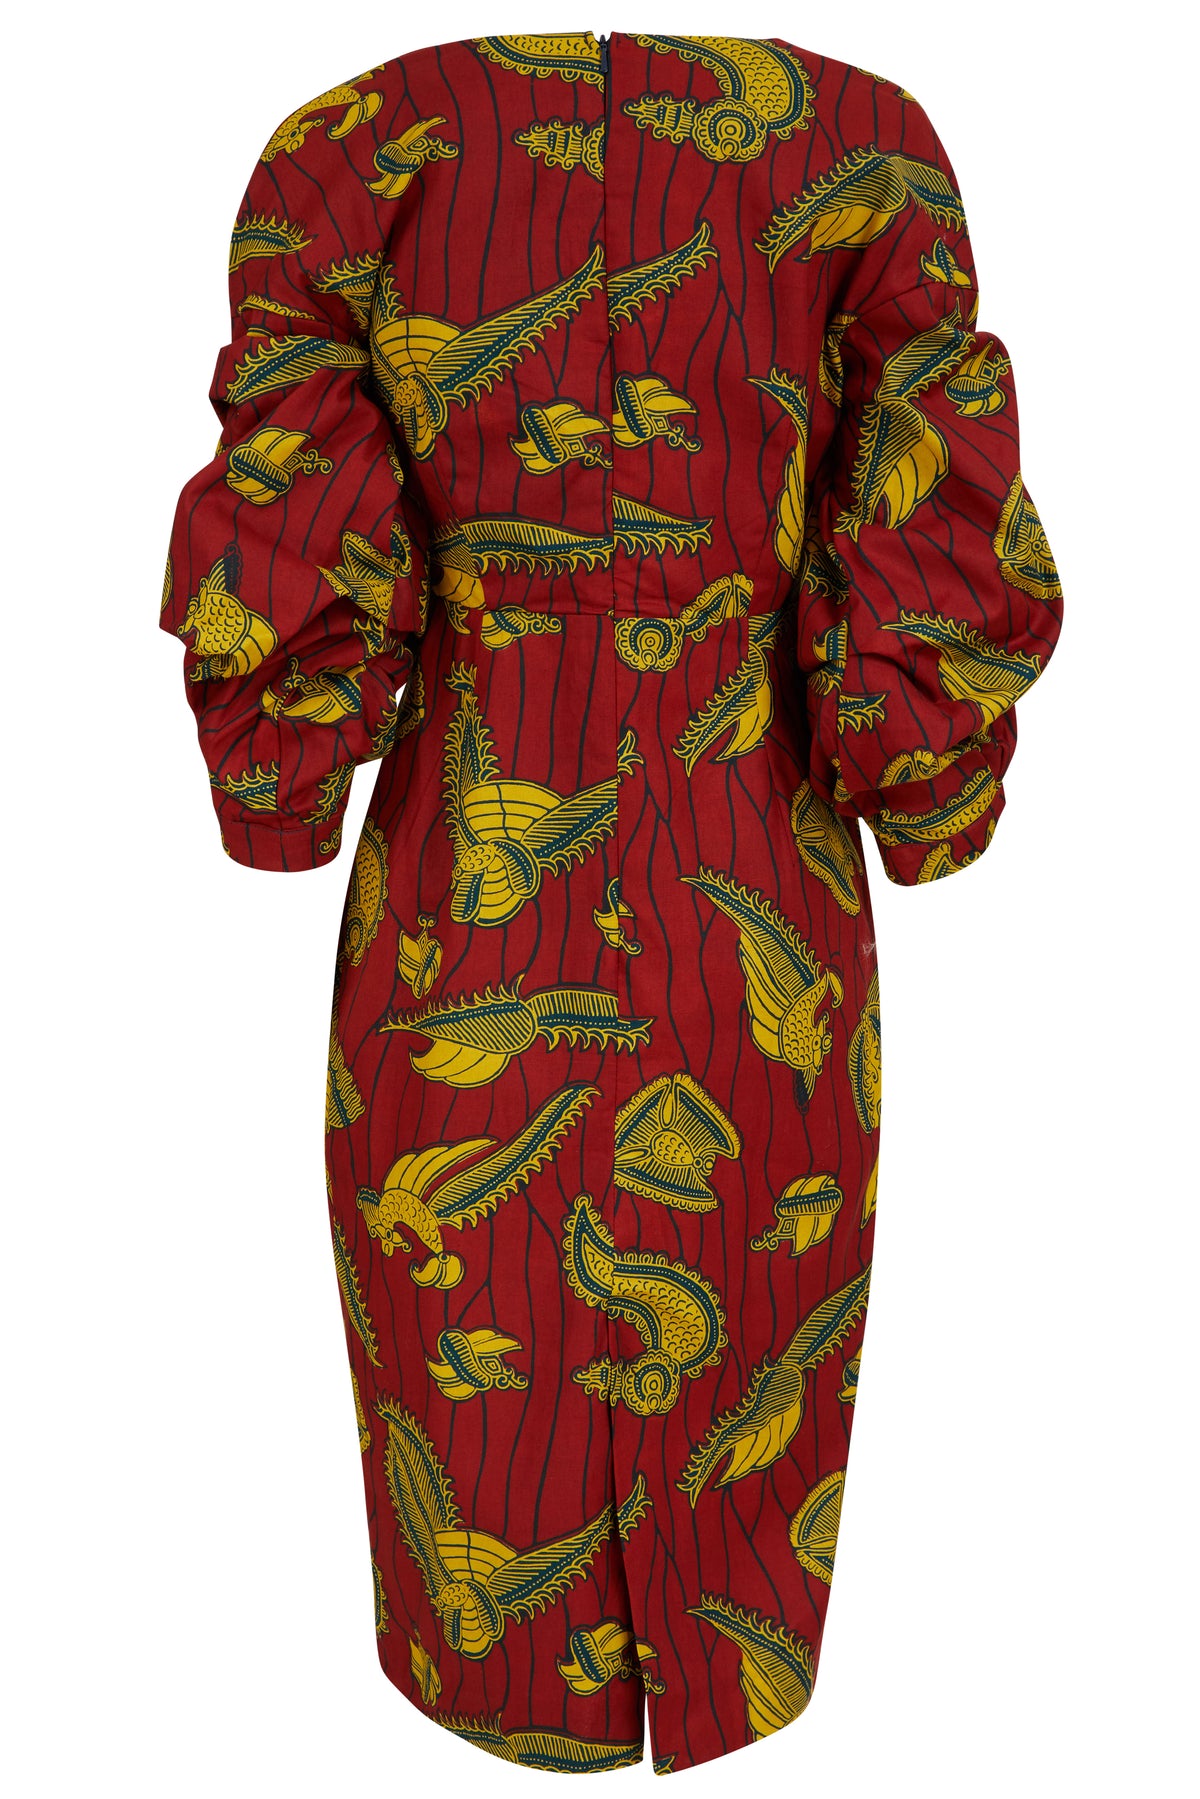 Red Coco exaggerated sleeve Midi dress - OHEMA OHENE AFRICAN INSPIRED FASHION